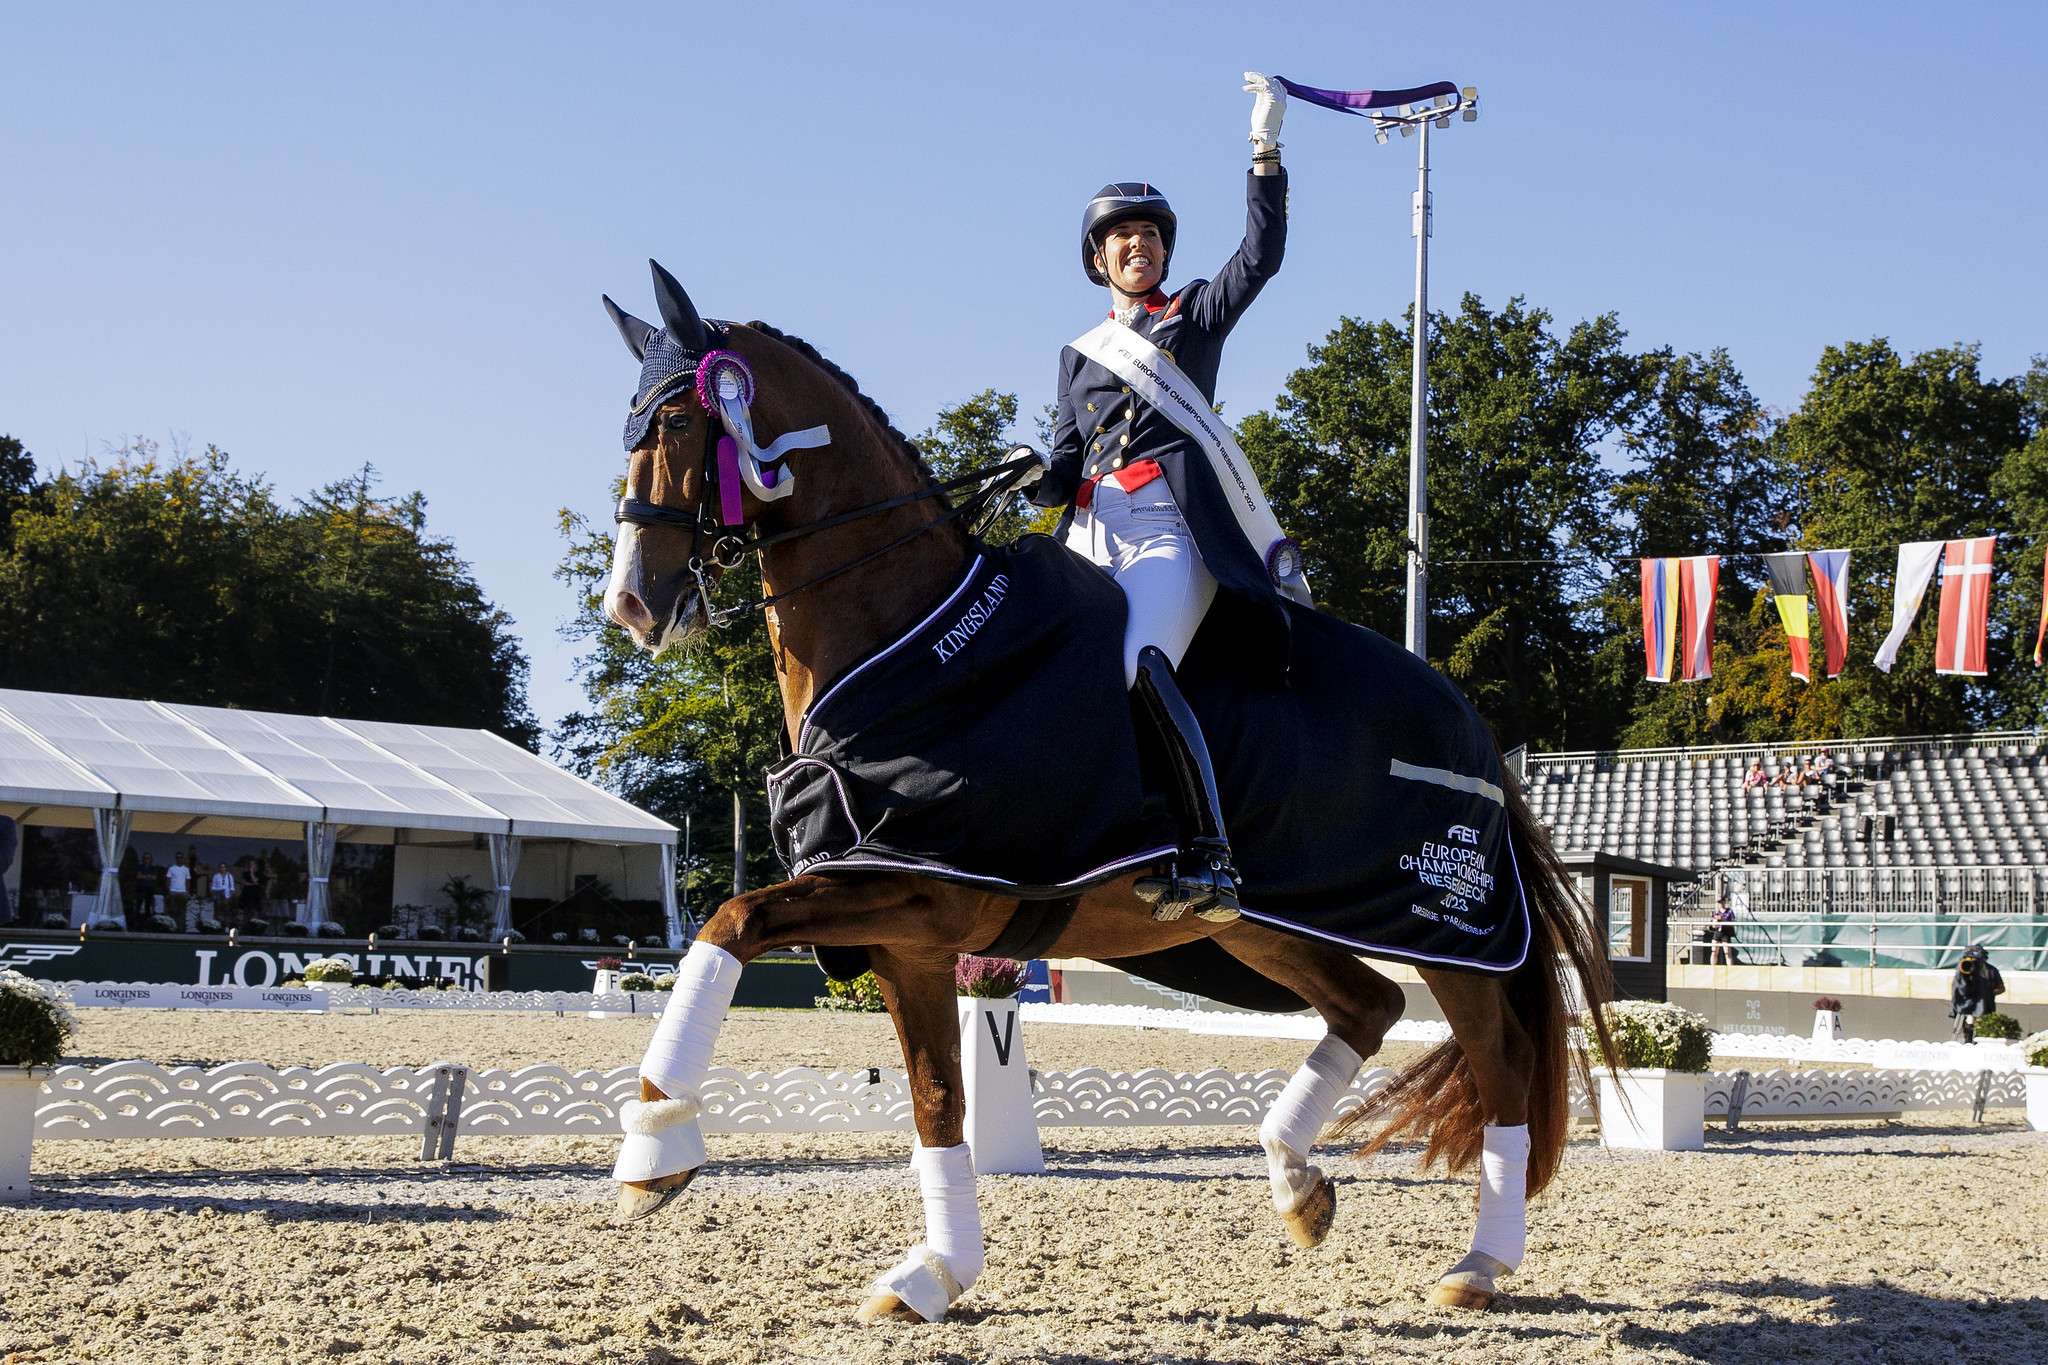 Charlotte Dujardin (GBR) riding Imhotep part of the winning team Great Britain in the Grand Prix Dressage - Team Competition - at the FEI Dressage European Championship Riesenbeck 2023 Copyright ©FEI/Leanjo de Koster